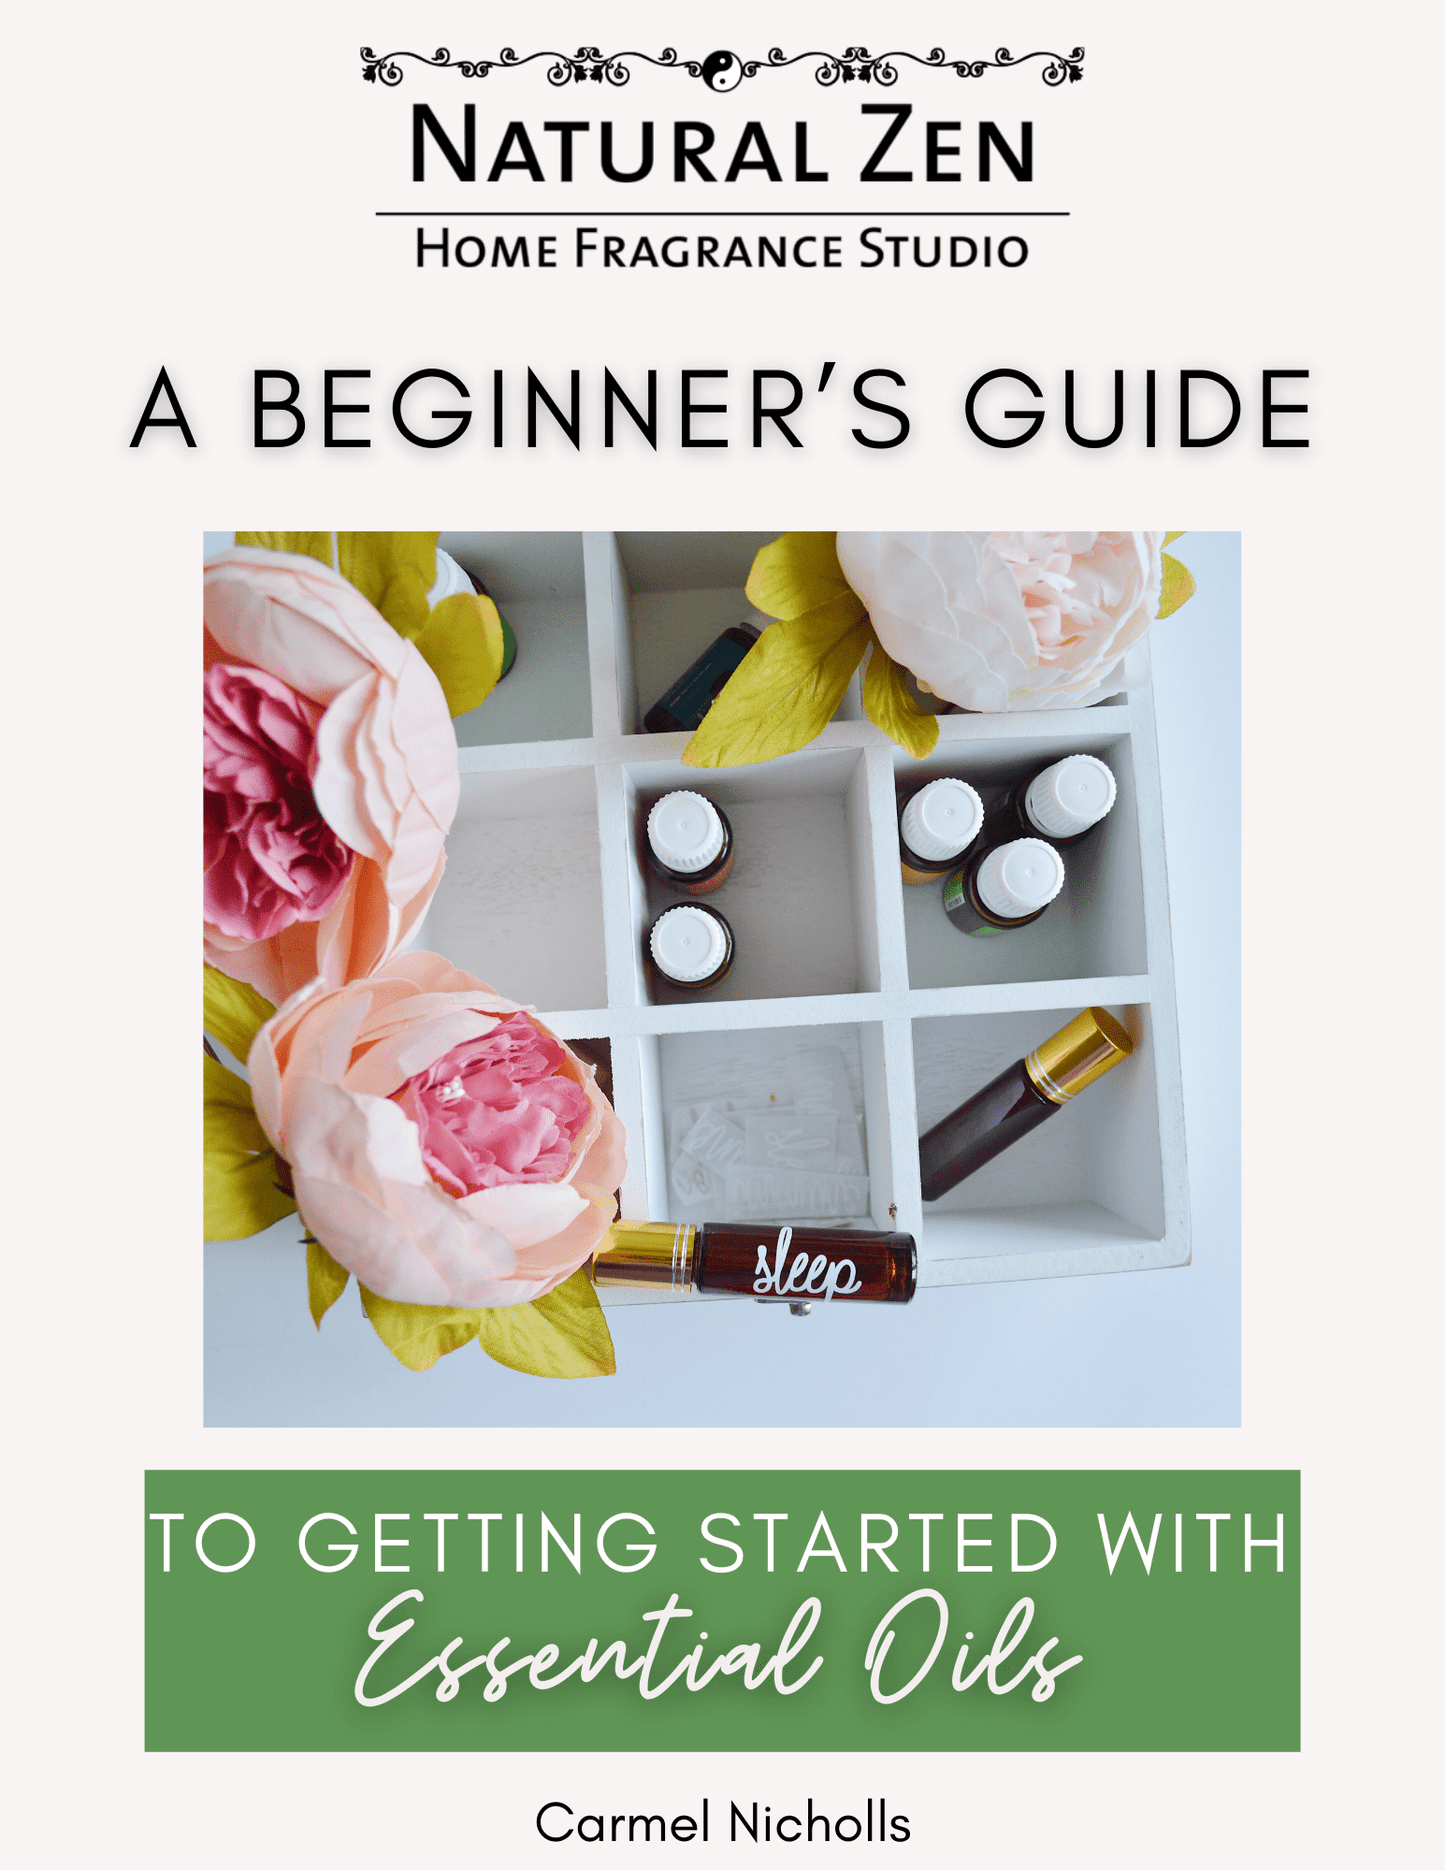 The Beginner's Guide to Getting Started with Essential Oils  - Natural Zen Home Fragrance Studio